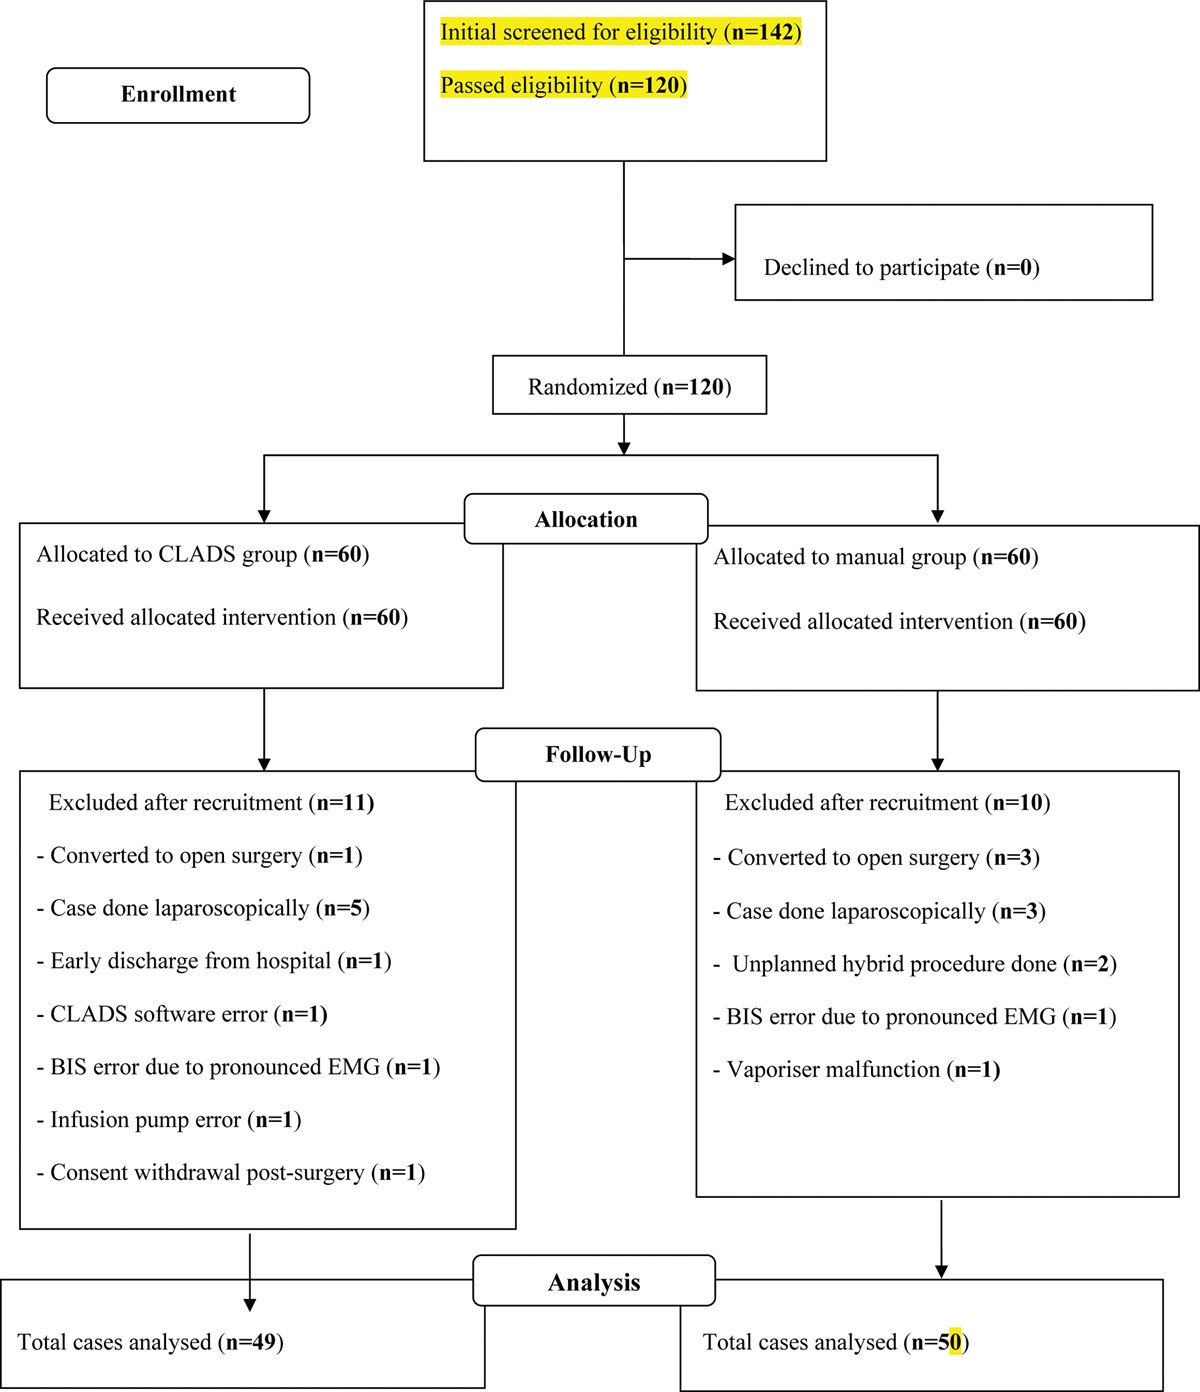 Evaluation of Quality of Recovery With Quality of Recovery-15 Score After Closed-Loop Anesthesia Delivery System-Guided Propofol Versus Desflurane General Anesthesia in Patients Undergoing Transabdominal Robotic Surgery: A Randomized Controlled Study